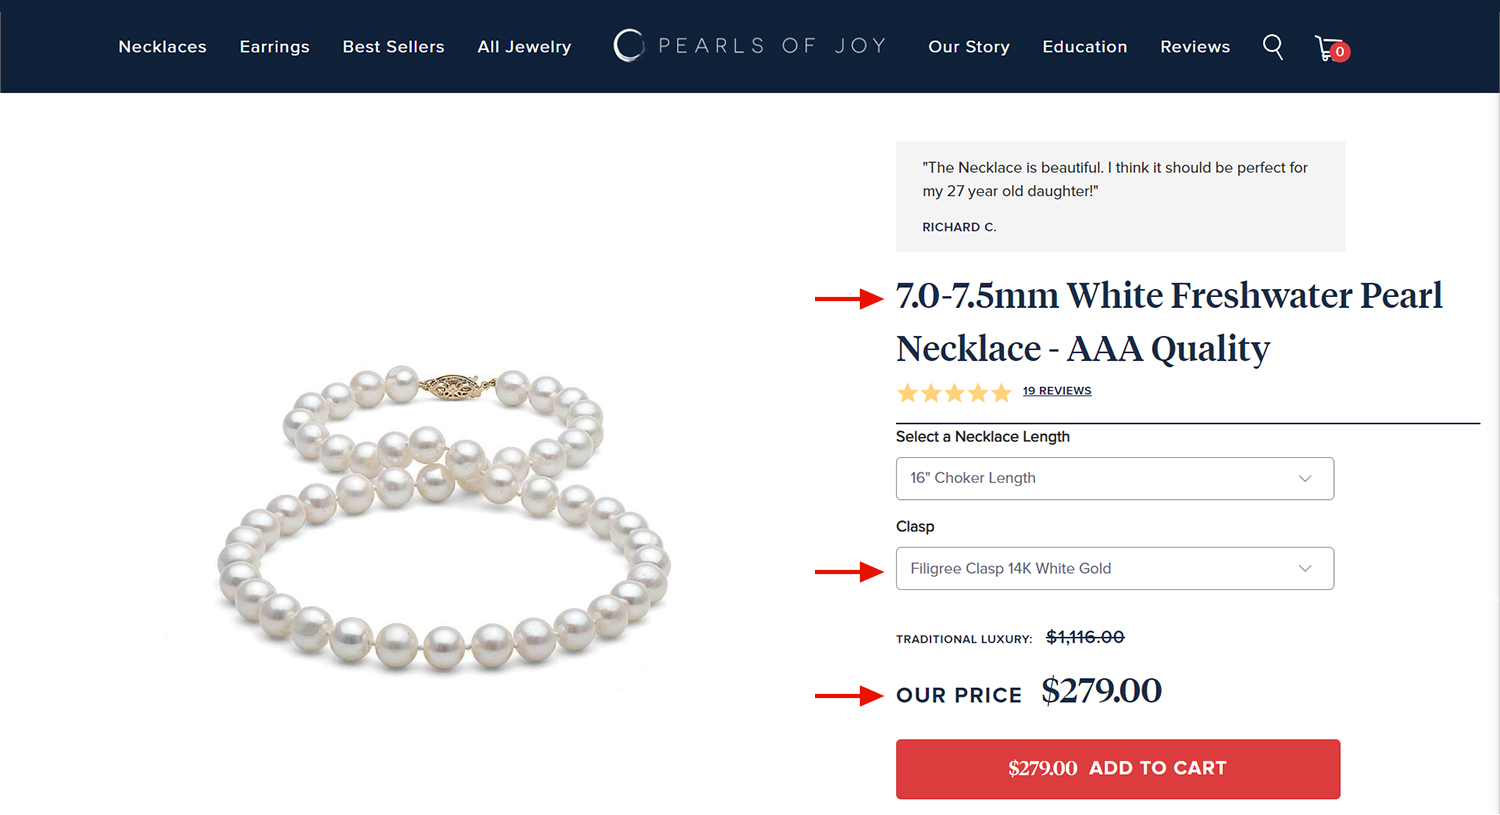 White Freshwater Pearl Necklace from Pearls of Joy